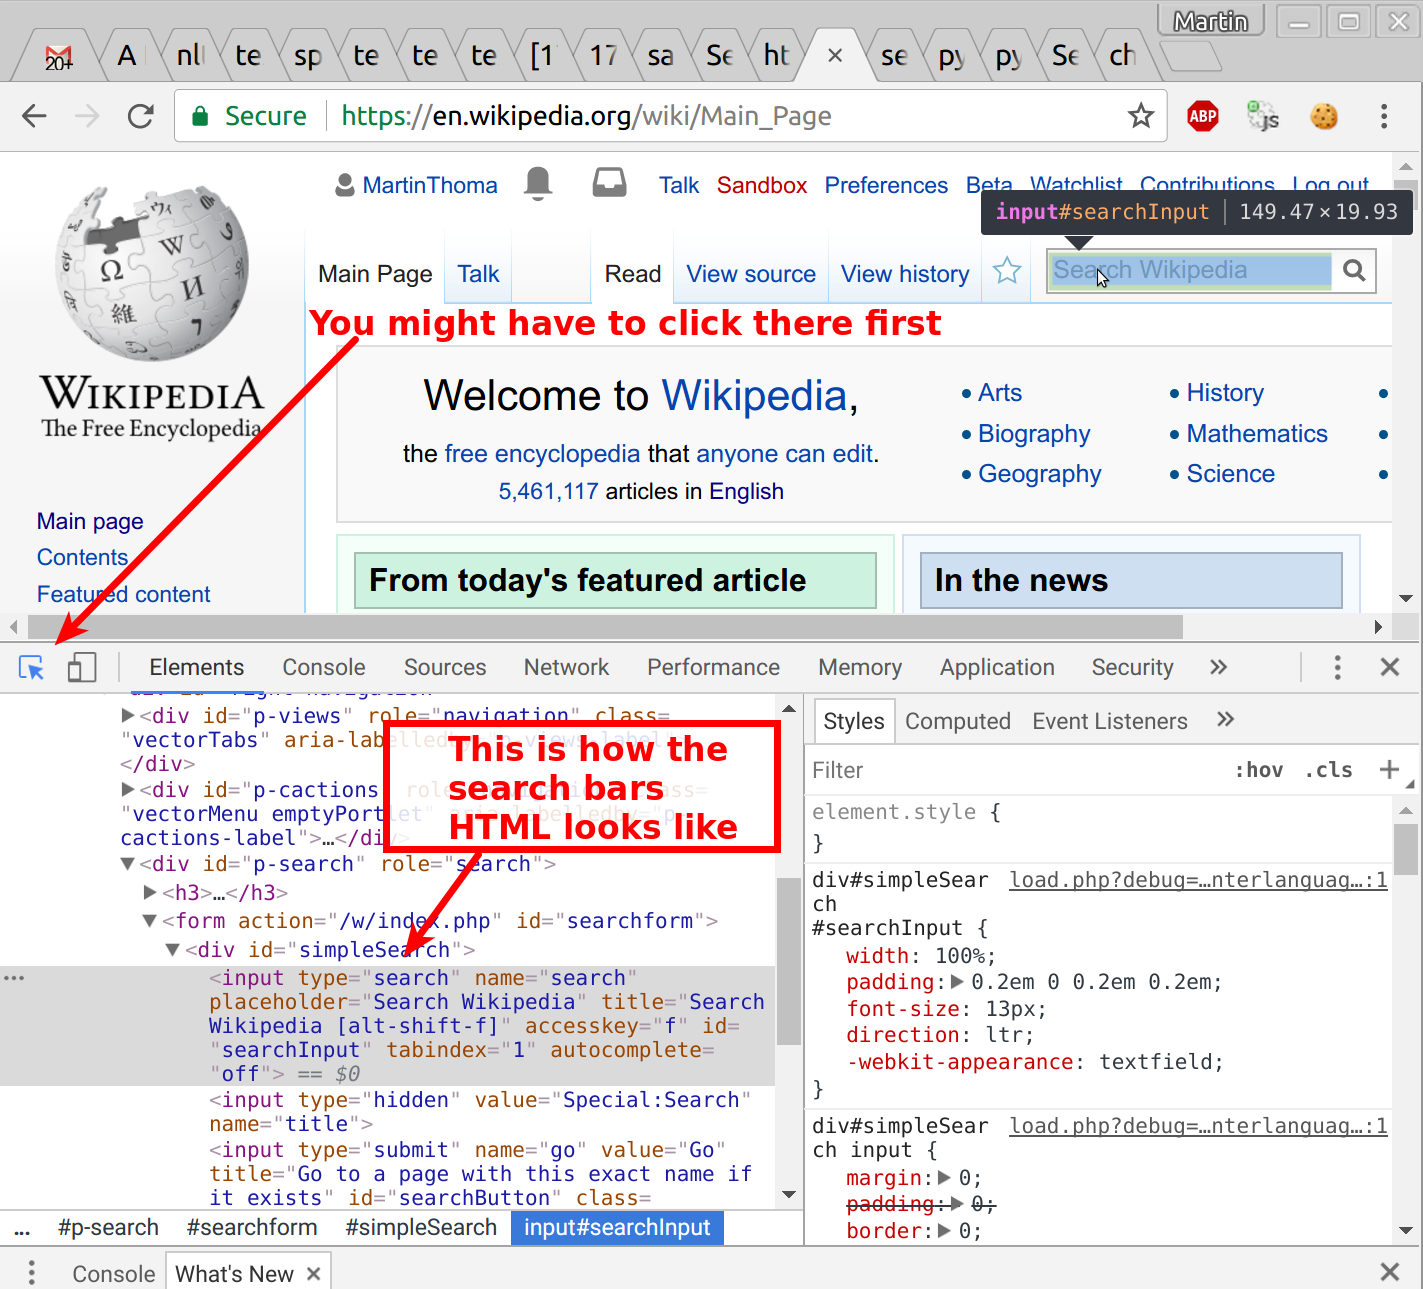 The inspection of the search bar with the Chrome Developer Tools reveals that it has the id 'searchInput'